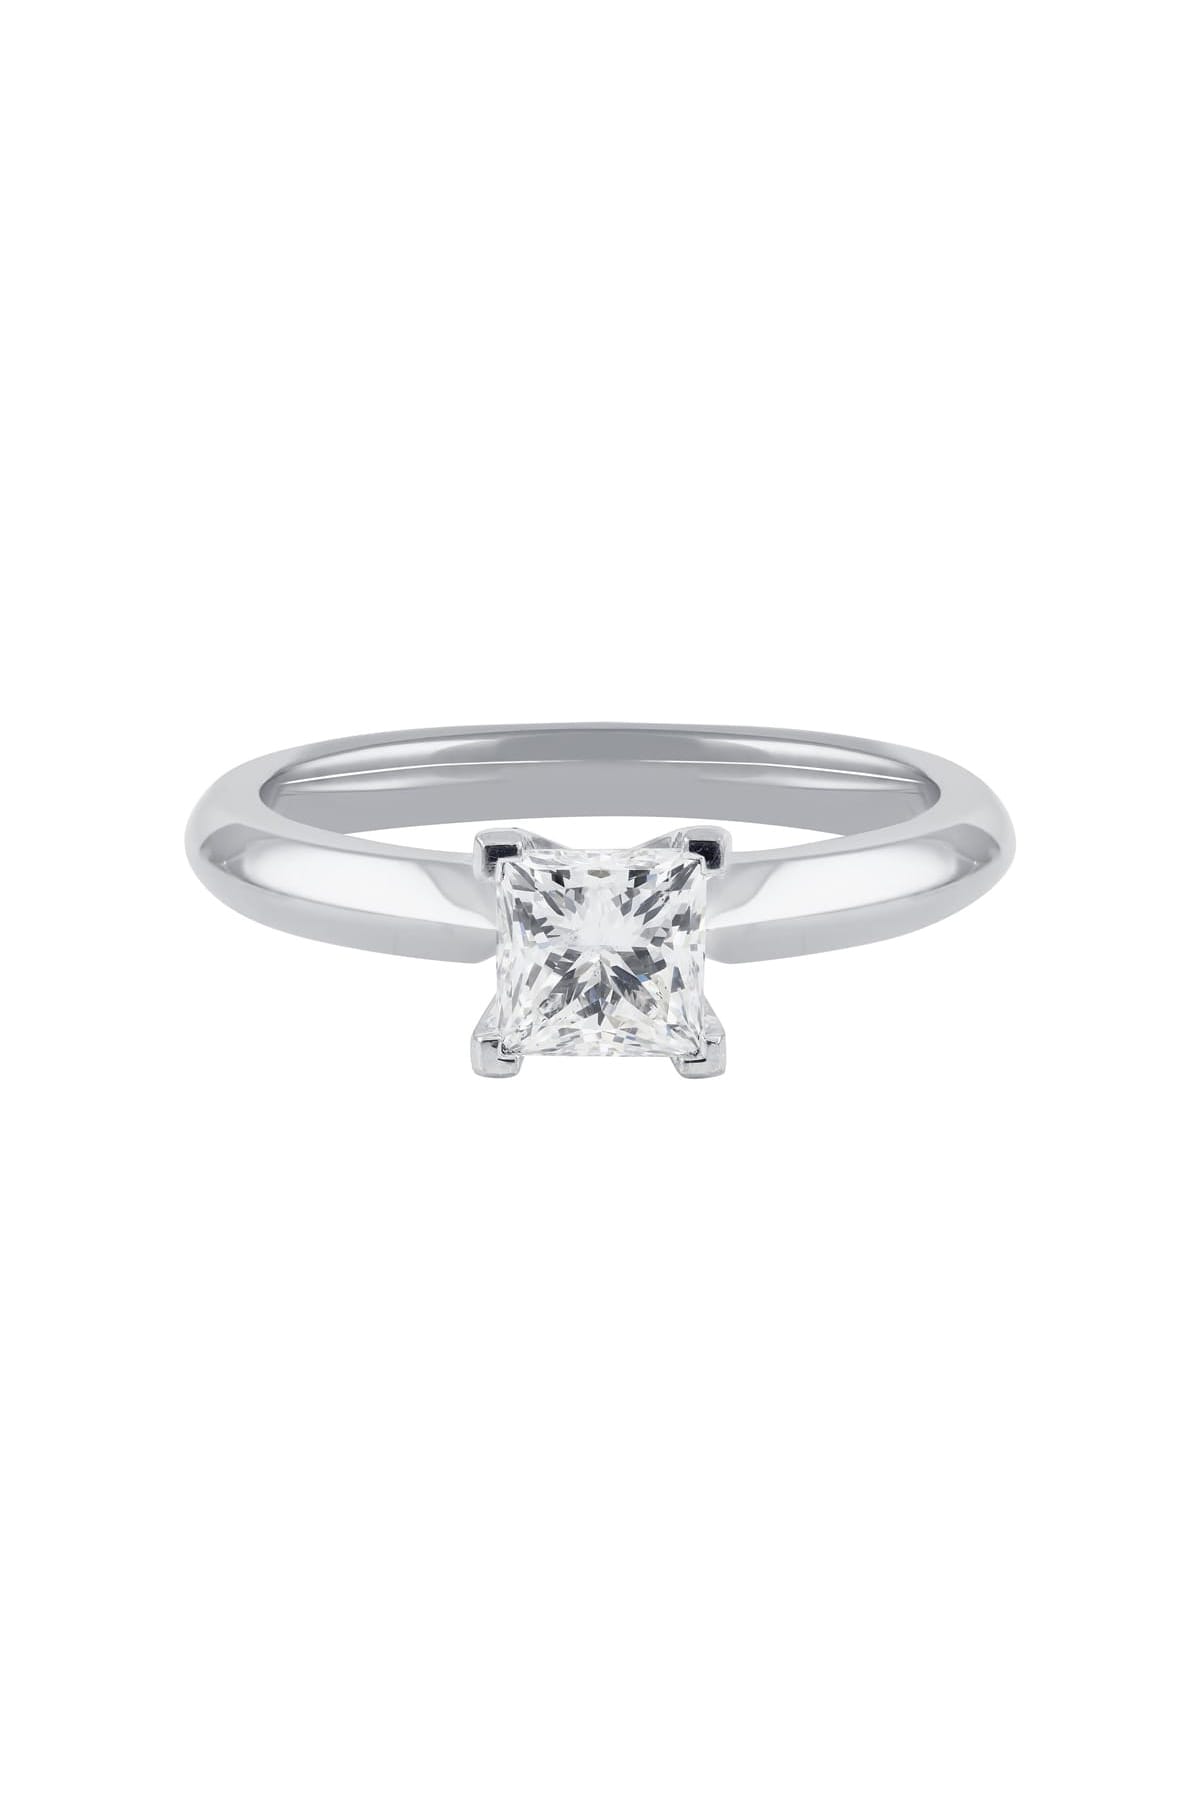 1.00ct Princess Cut Diamond Engagement Ring set in 18ct White Gold available at LeGassick Diamonds and Jewellery Gold Coast, Australia.